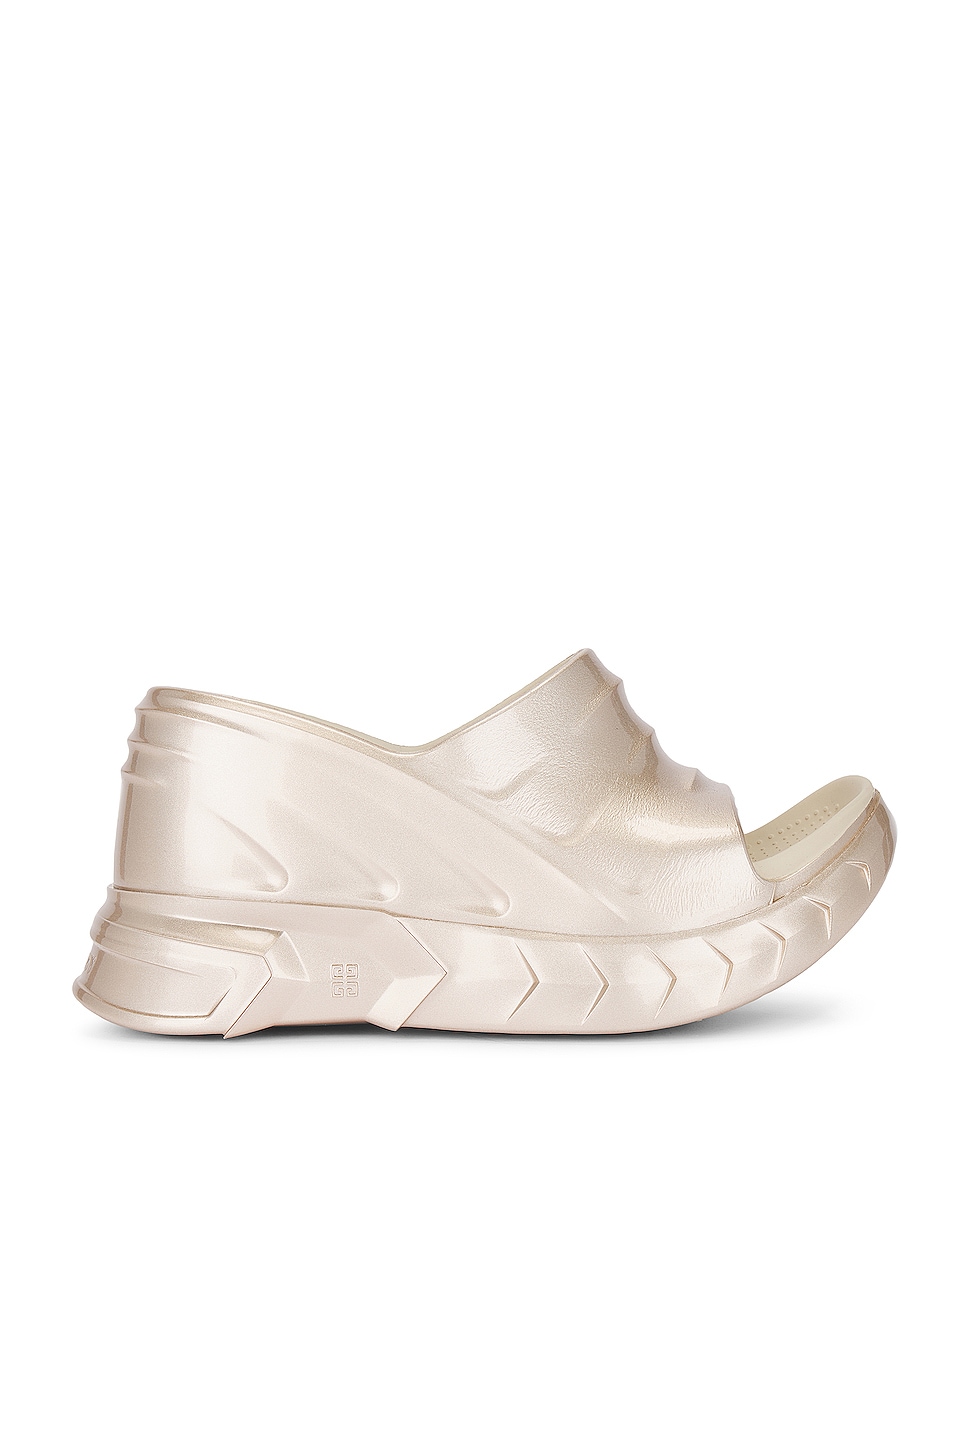 Image 1 of Givenchy Marshmallow Slider Wedge Sandal in Dusty Gold